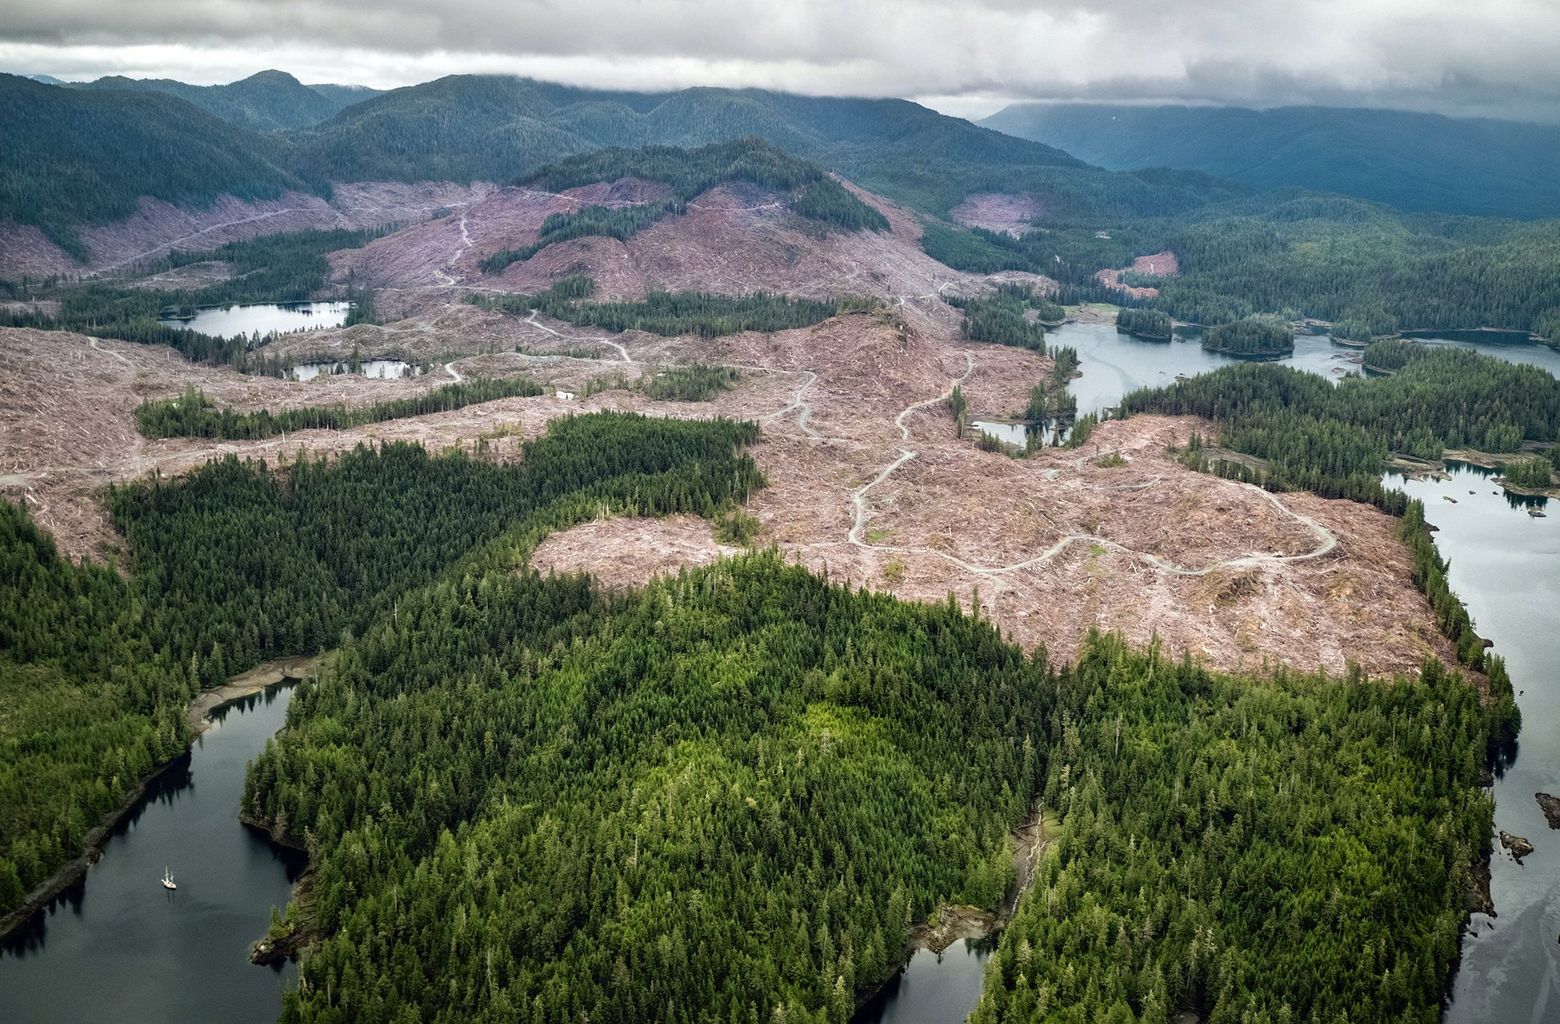 Save the rare wild beauty of the Tongass National Forest from renewed logging | The Seattle Times